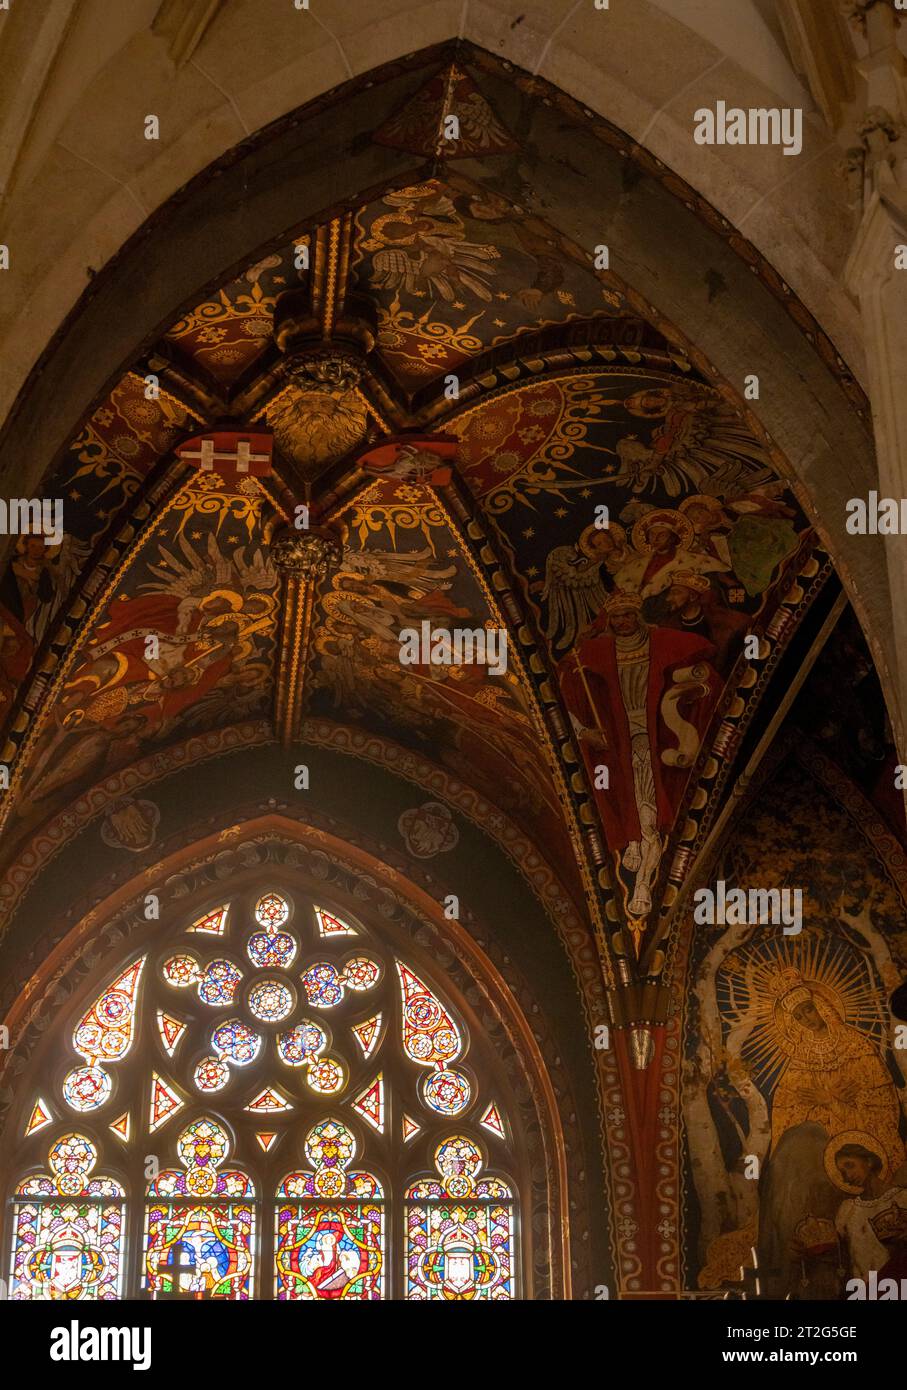 painted vaulting of Queen Sophia's chapel, Wawel Cathedral, Krakow, Poland Stock Photo